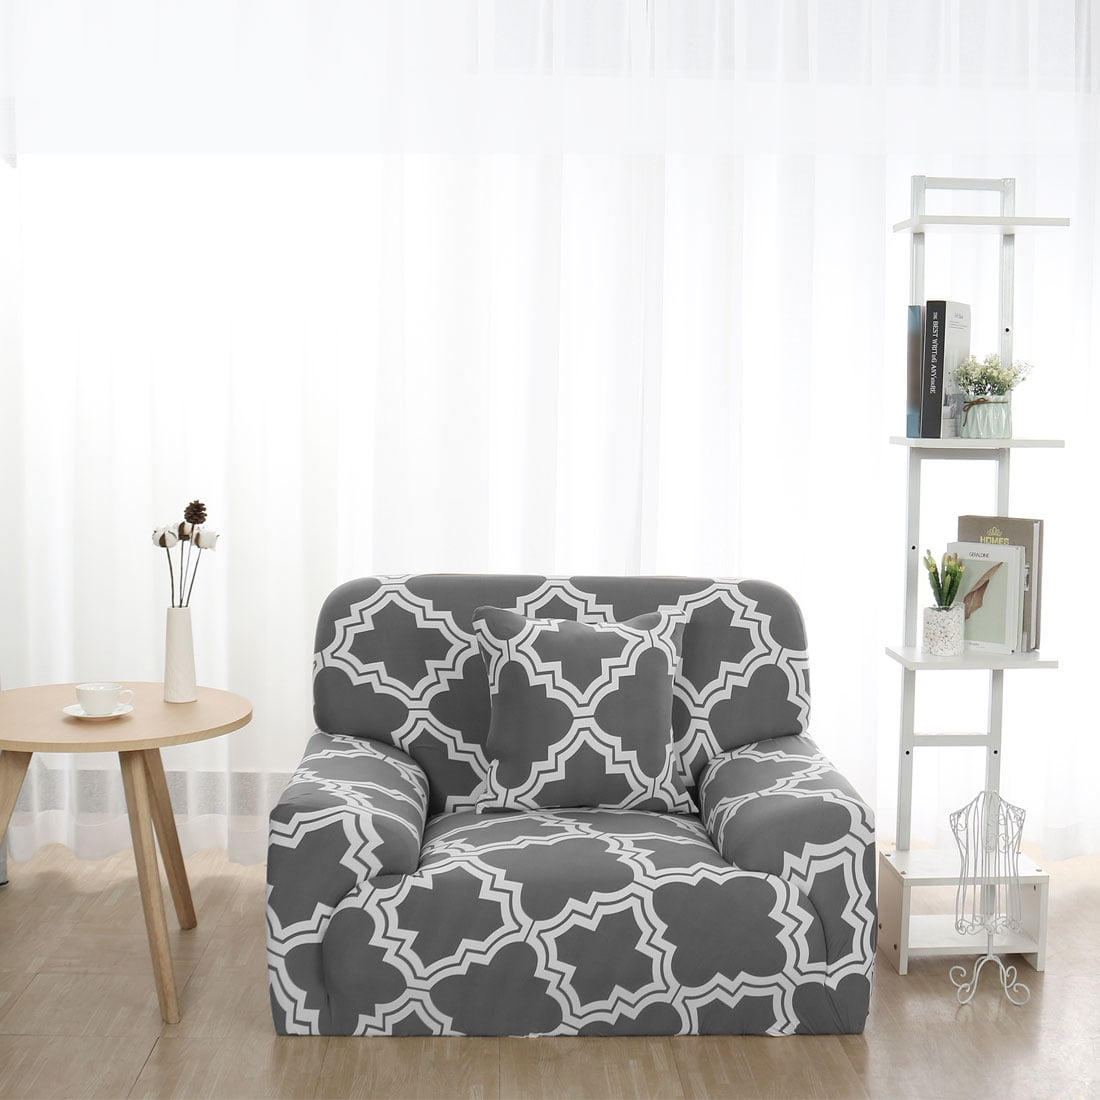 Details about   Stretch Jacquard Sofa Seat Cushion Cover Couch Slipcover Replacement for Garden 